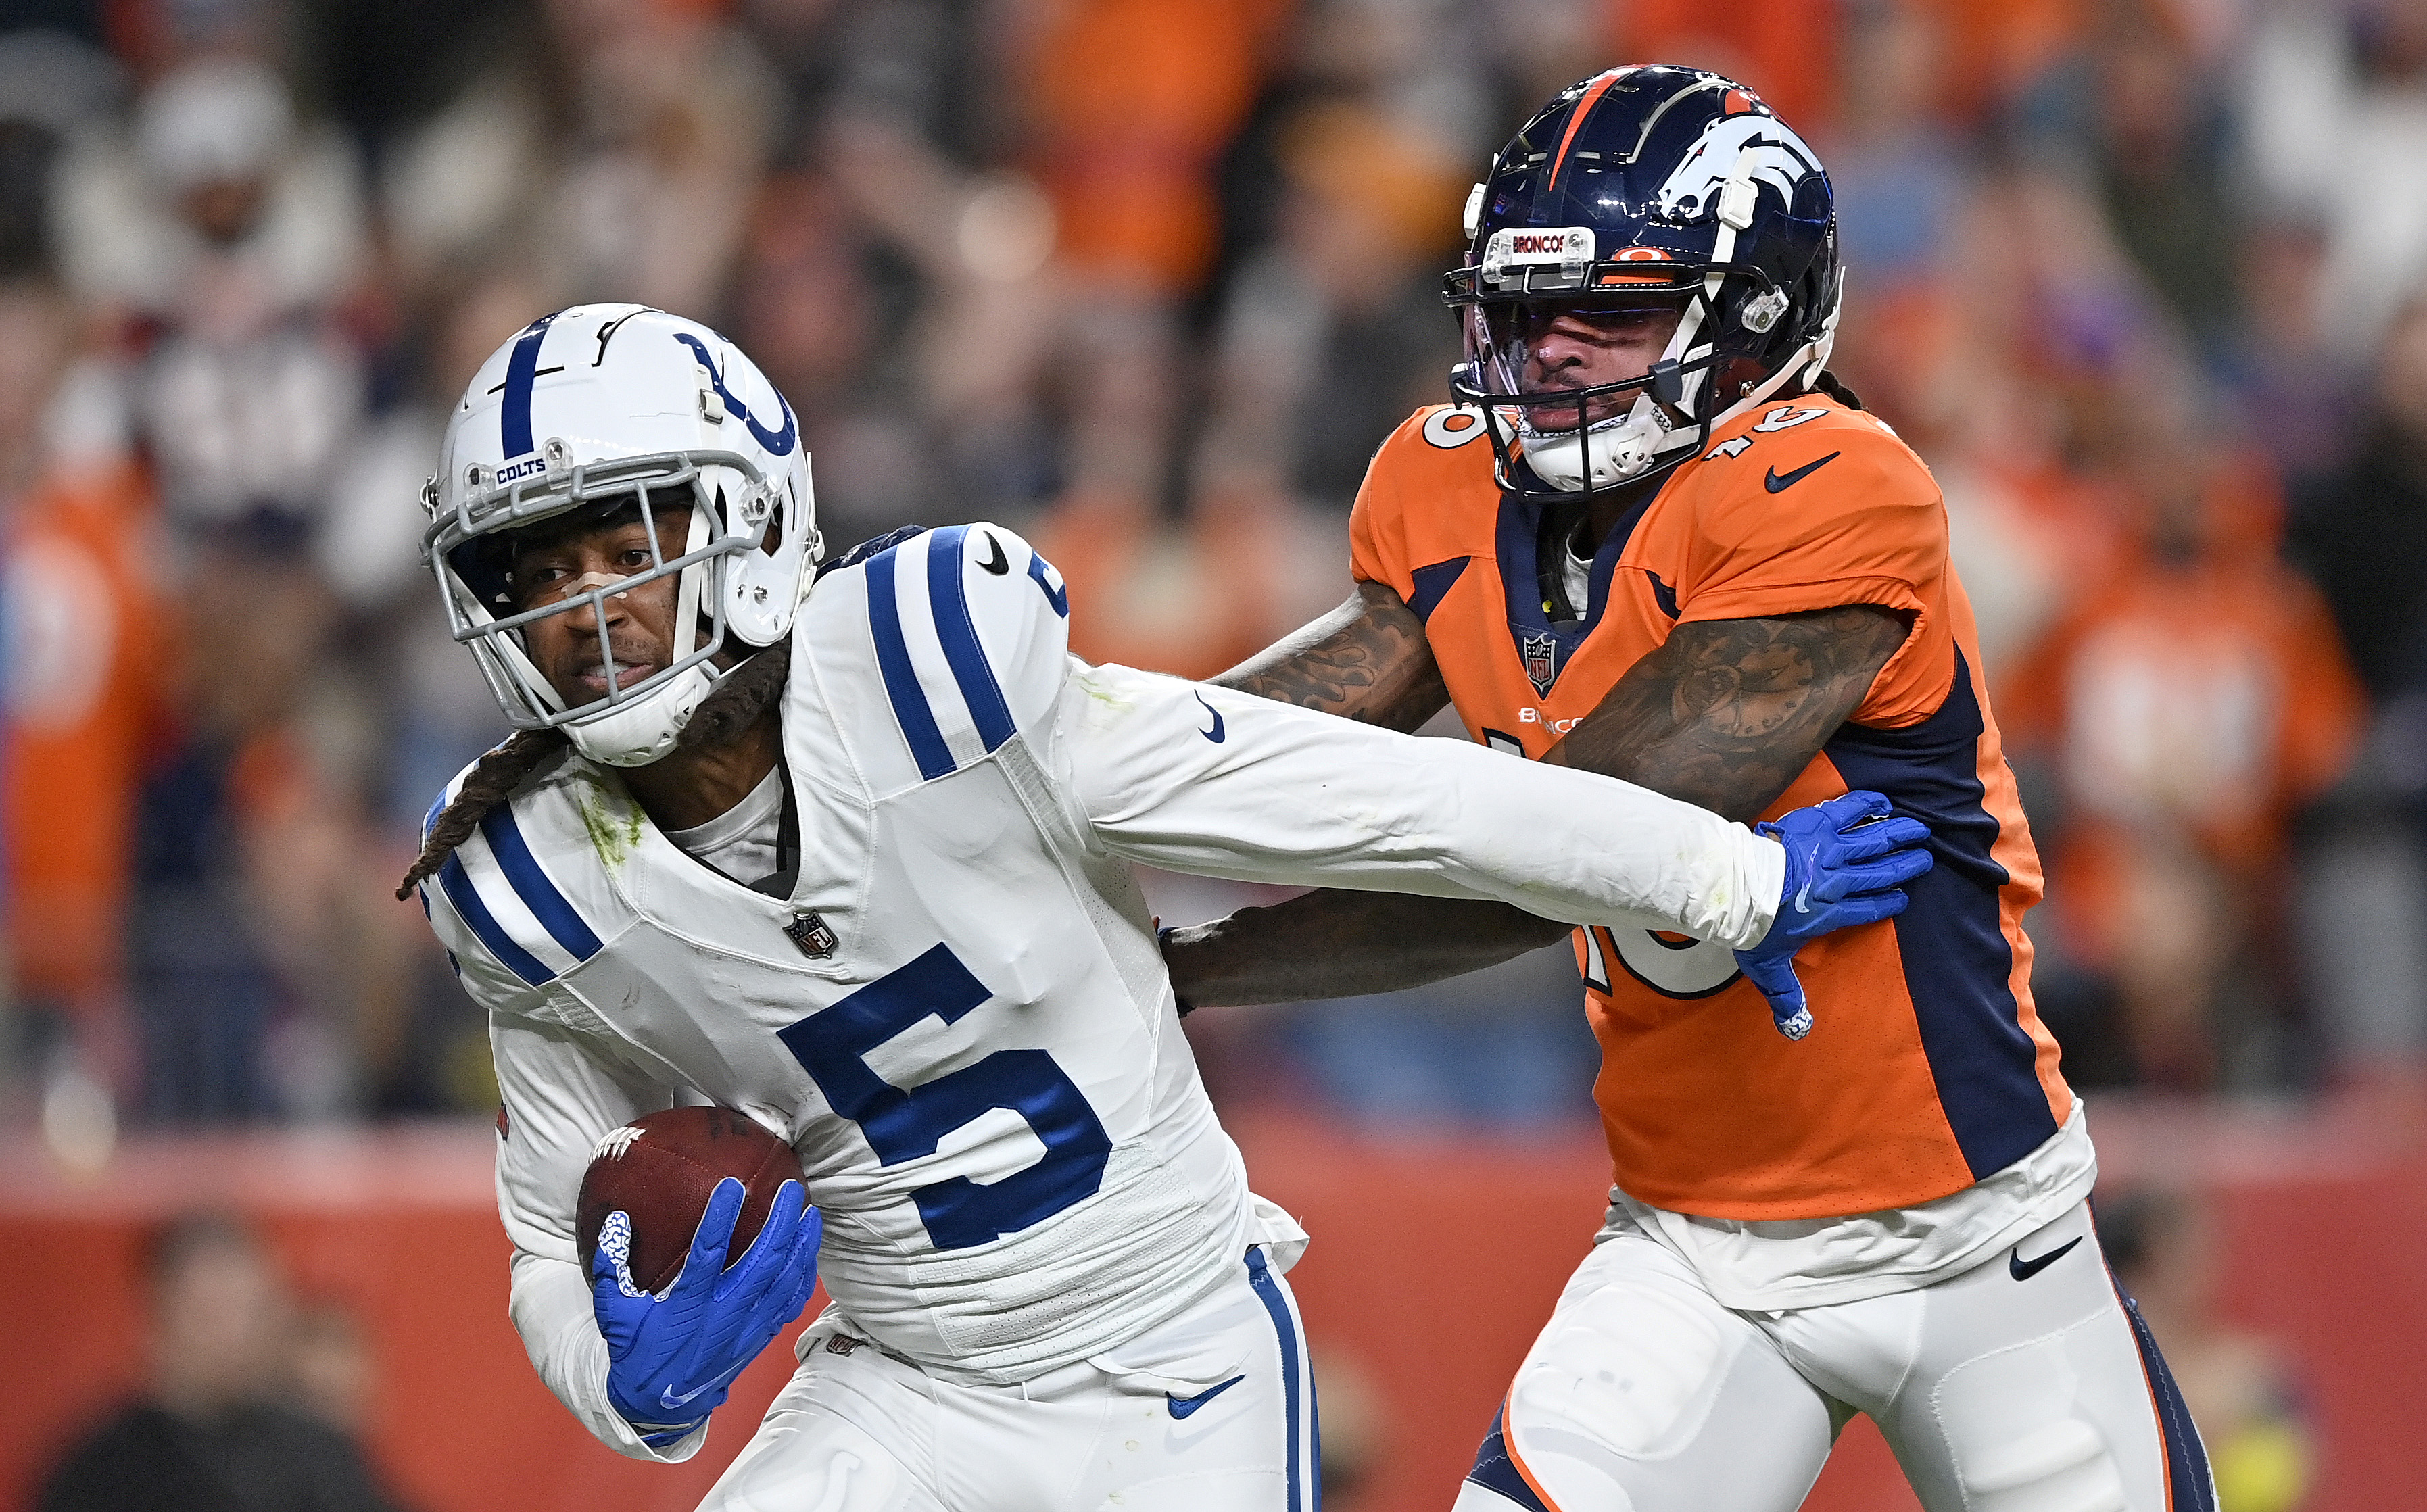 Cornerback Stephon Gilmore (#5) of the Indianapolis Colts intercepts a pass by quarterback Russell Wilson of the Denver Broncos in the game at Empower Field at Mile High in Denver, Colorado, October 6, 2022. /CFP